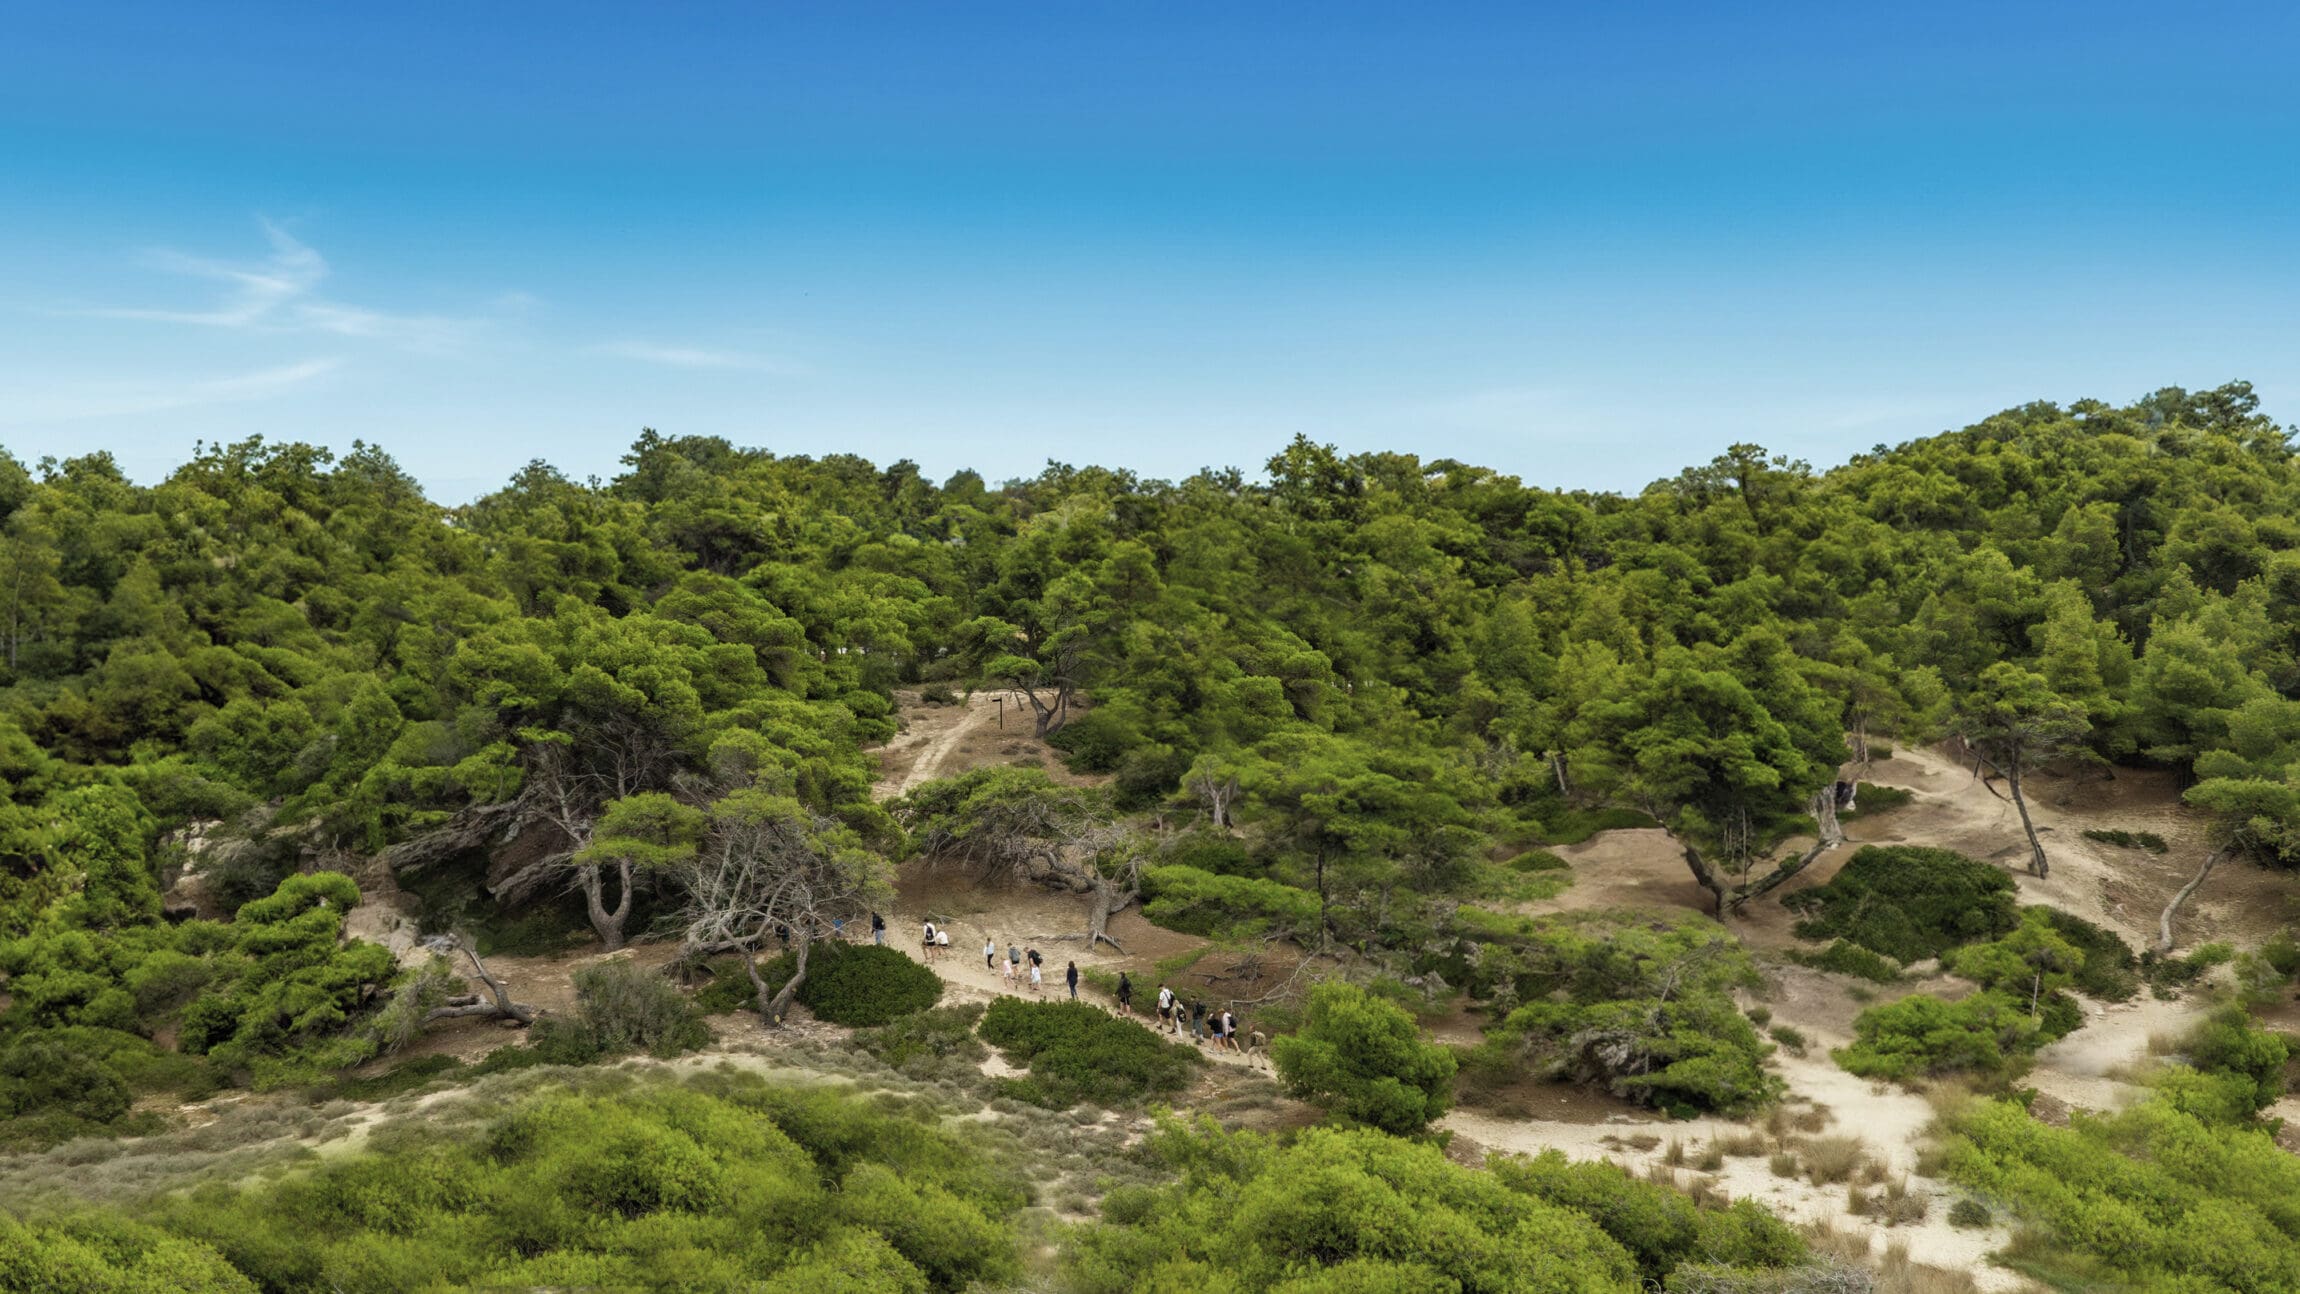 Hiking through Greece. Sani Resort became the first carbon-neutral resort in Greece in 2022